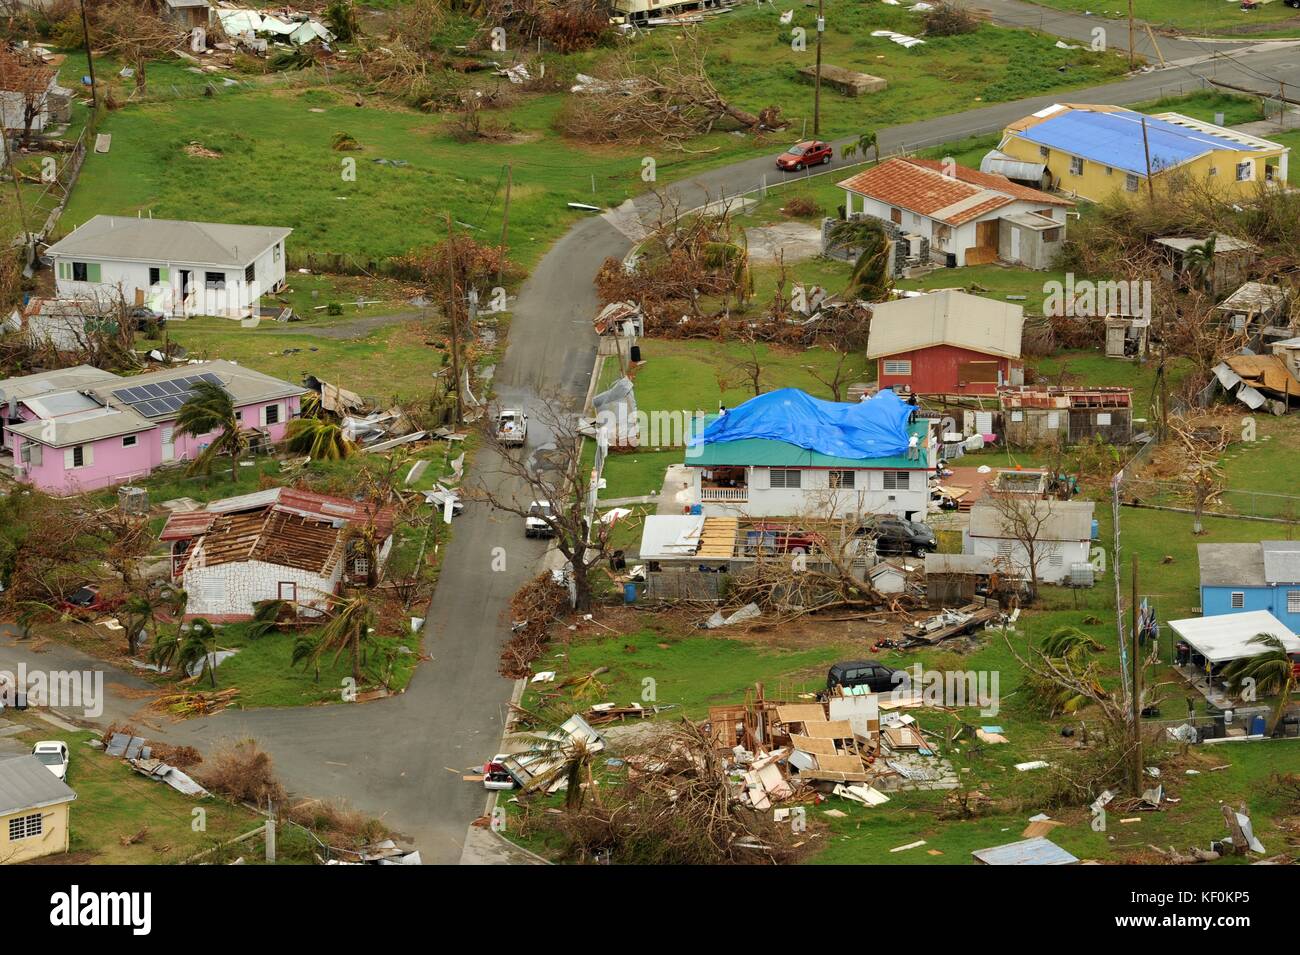 Aerial view of the damage caused by Hurricane Maria September 30, 2017 in St. Croix, U.S. Virgin Islands. Stock Photo